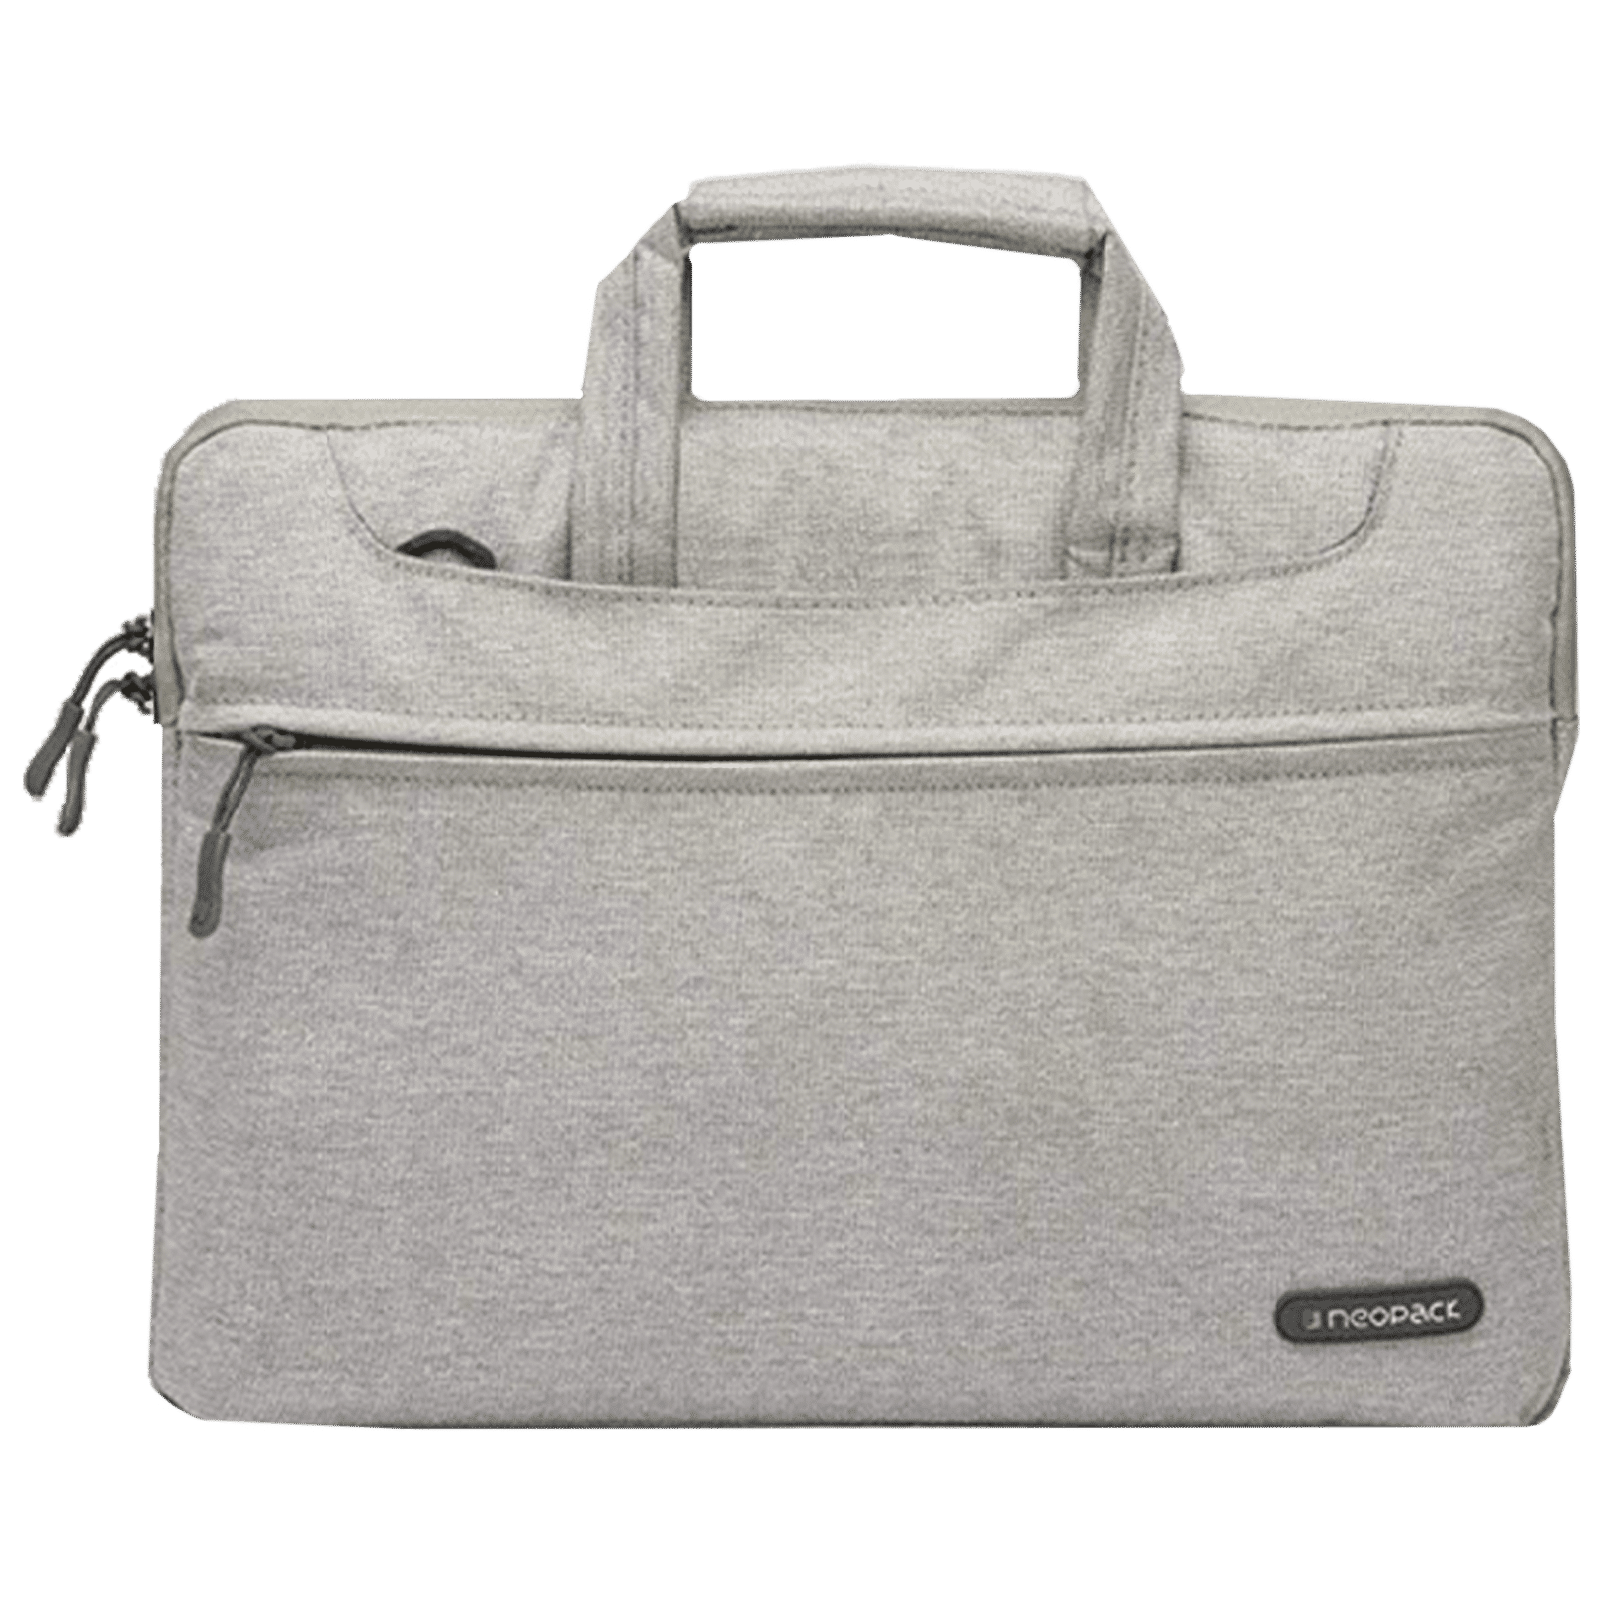 Buy Croma Urban PU Fabric 14 Inch Laptop Bagpack with 4 Storage  Compartments (CRXL5209, Grey) at Amazon.in